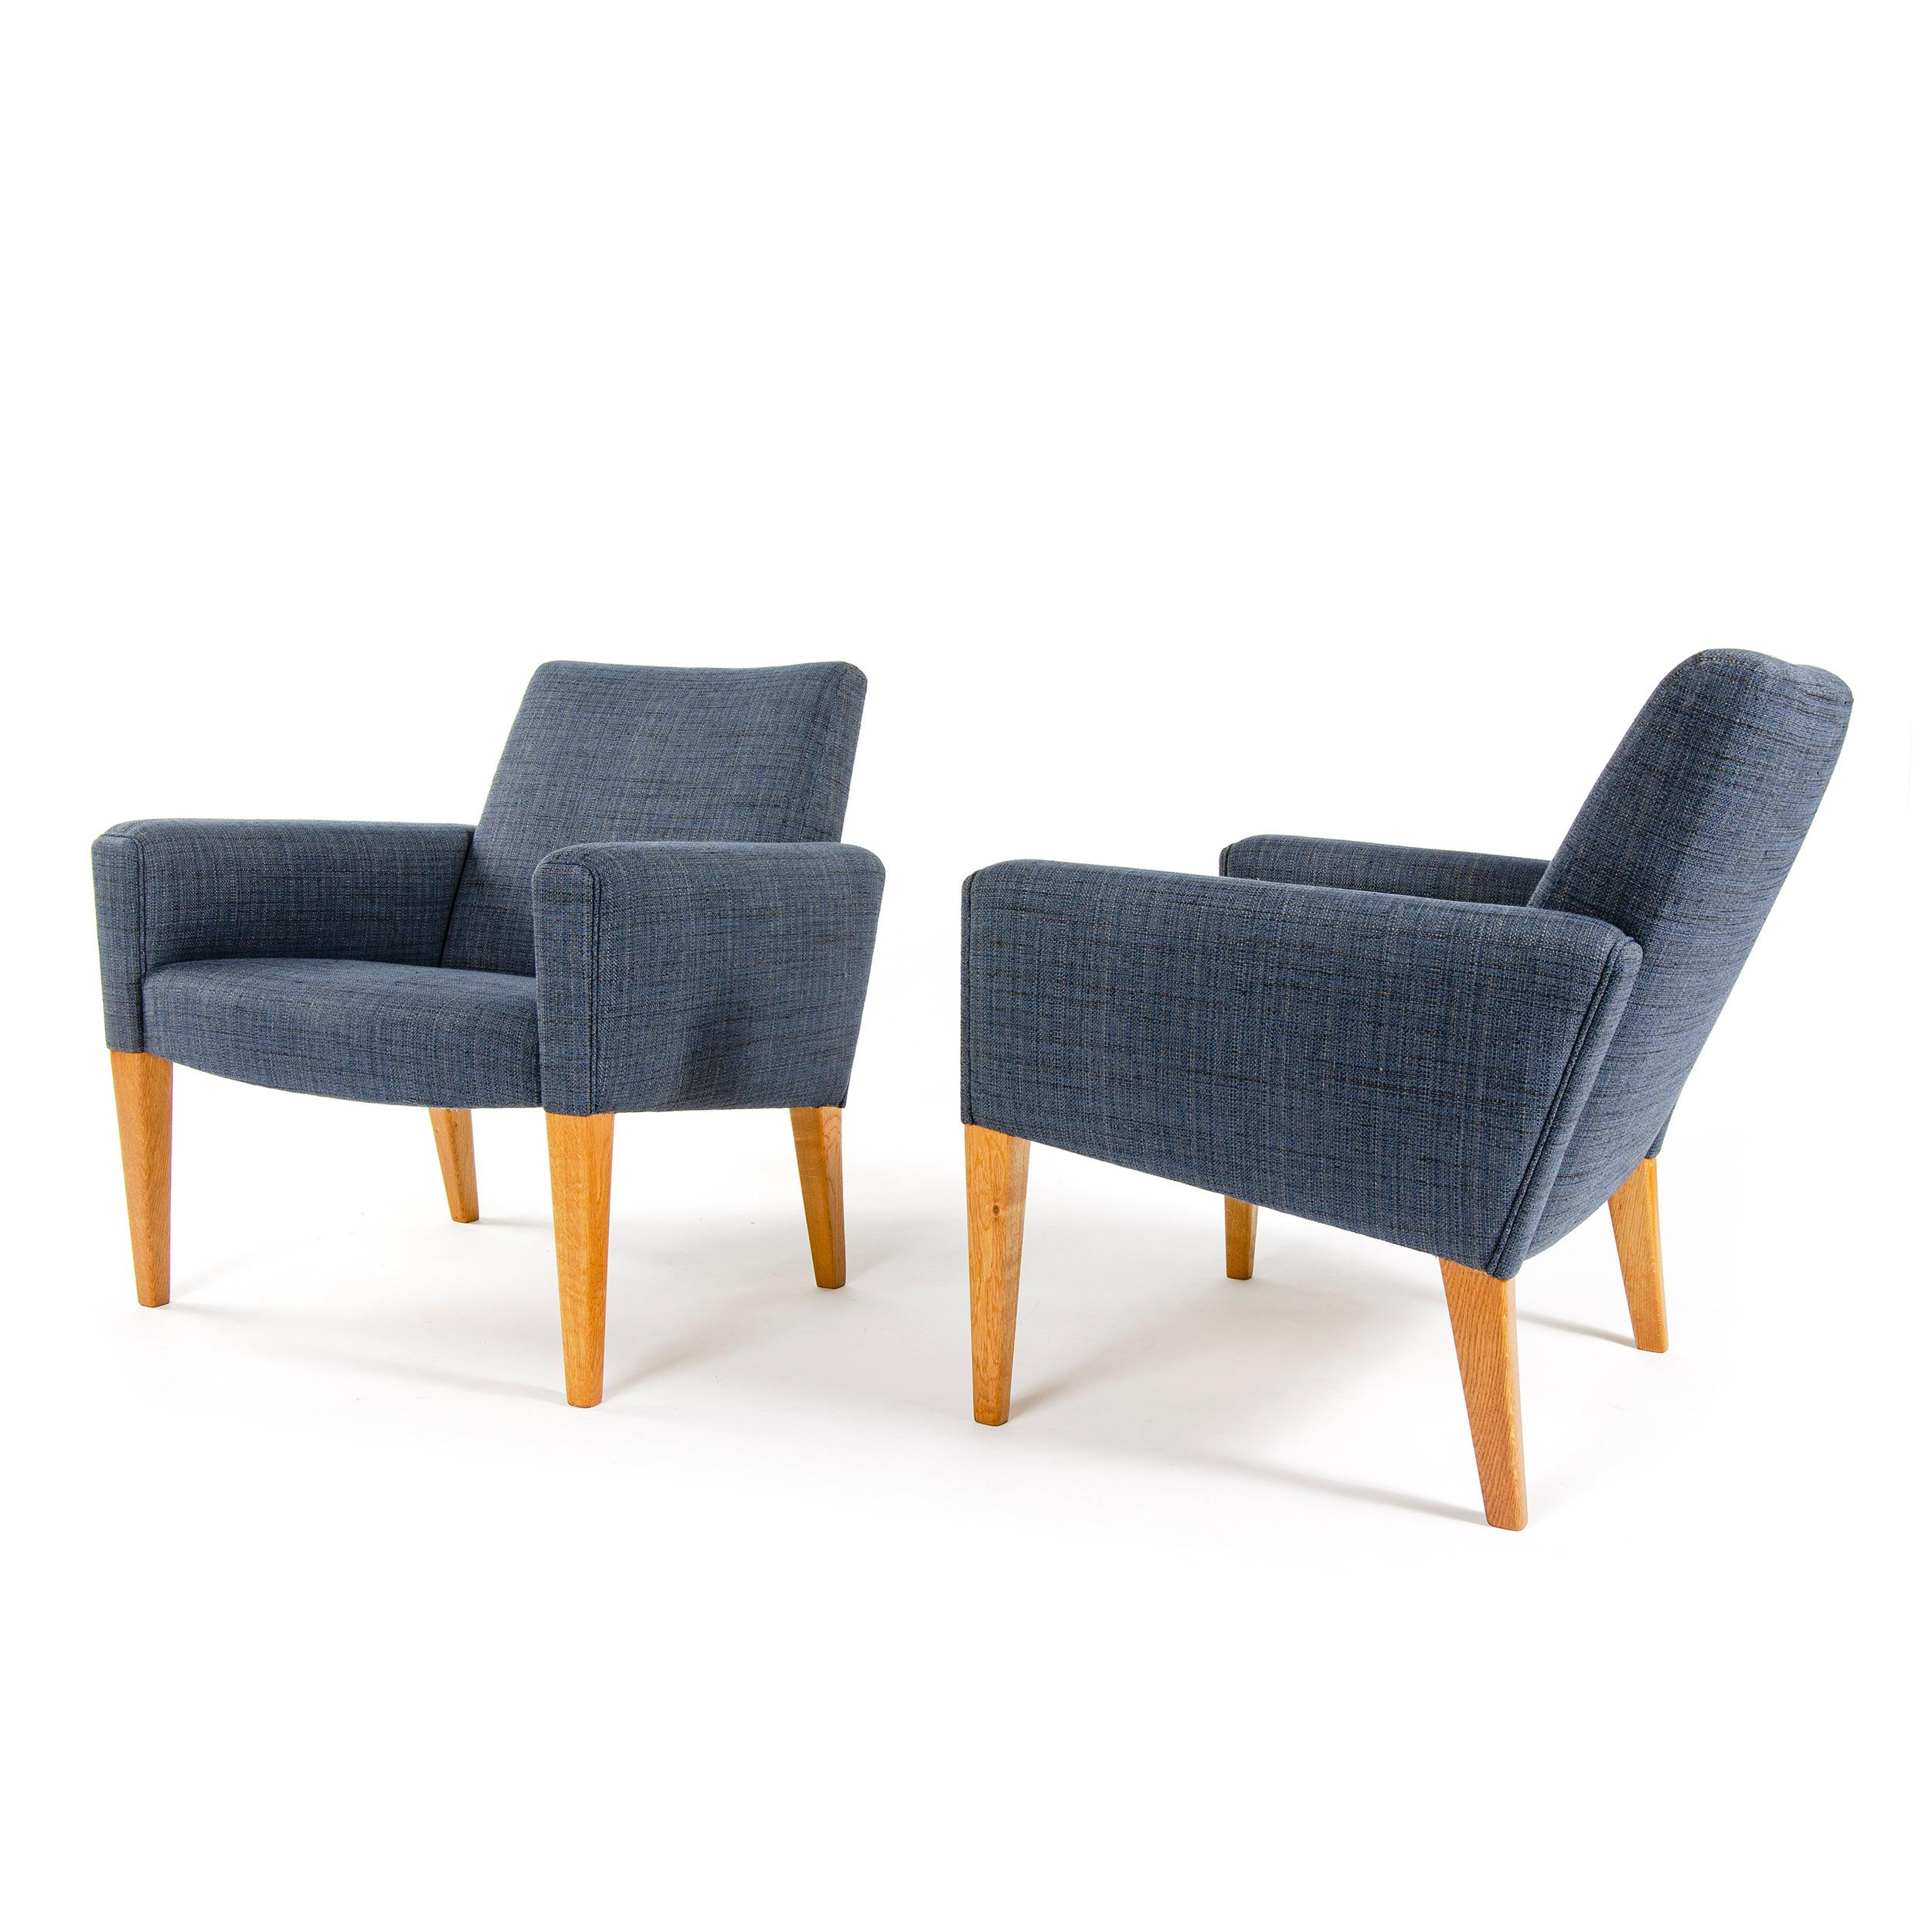 A pair of lounge chairs, newly upholstered in a dark blue, cotton and linen weave, on top of tapered wood legs. Designed by Hans Wegner, made by AP Stolen in Denmark, circa 1950s.